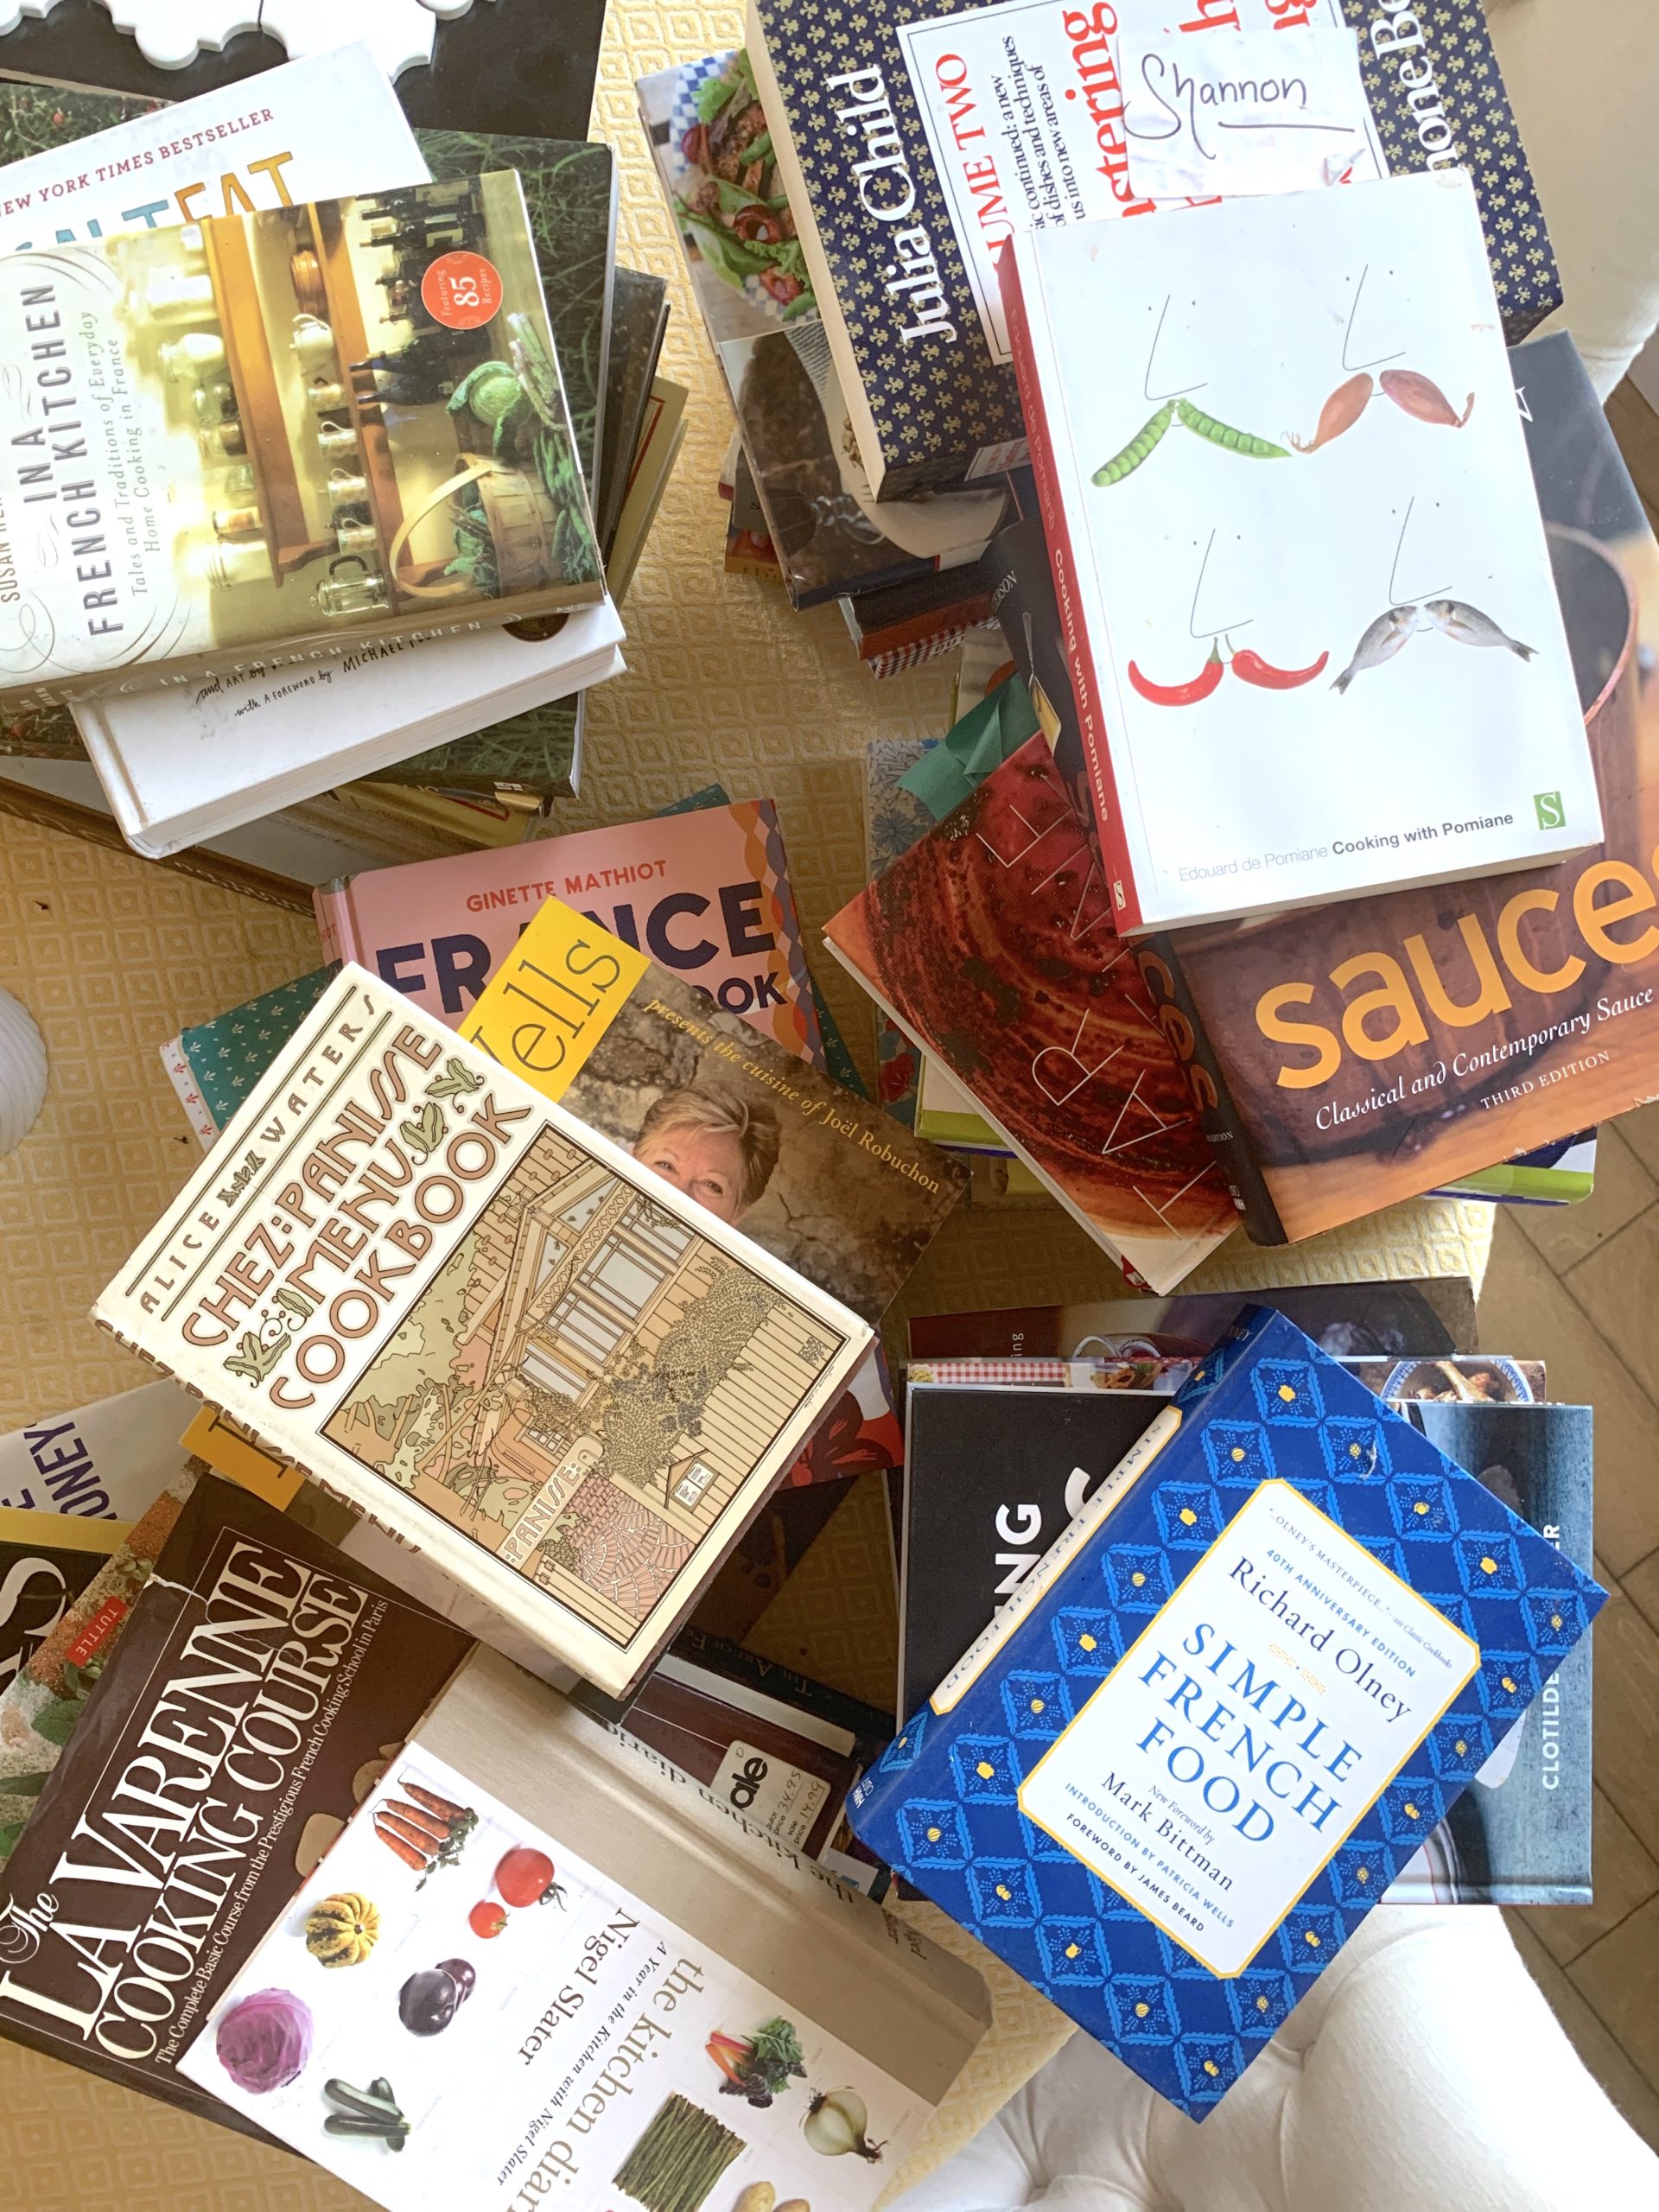 10 Favorite French Cookbooks for Your Kitchen Library